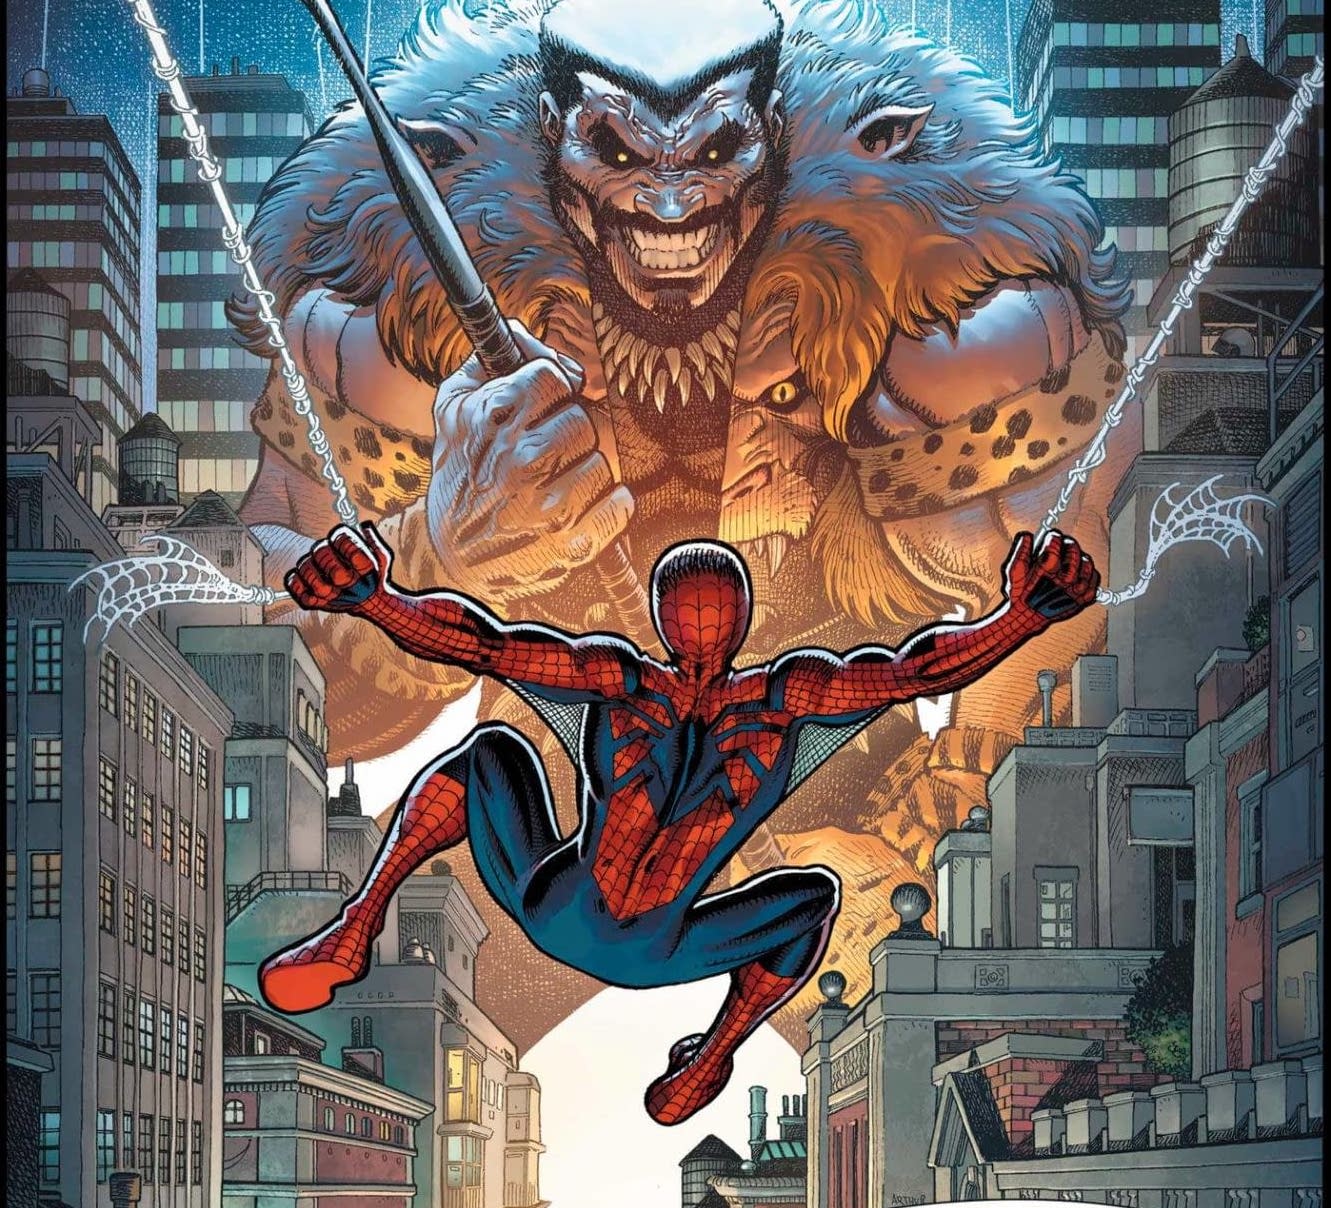 'Amazing Spider-Man' #79 is pure entertainment